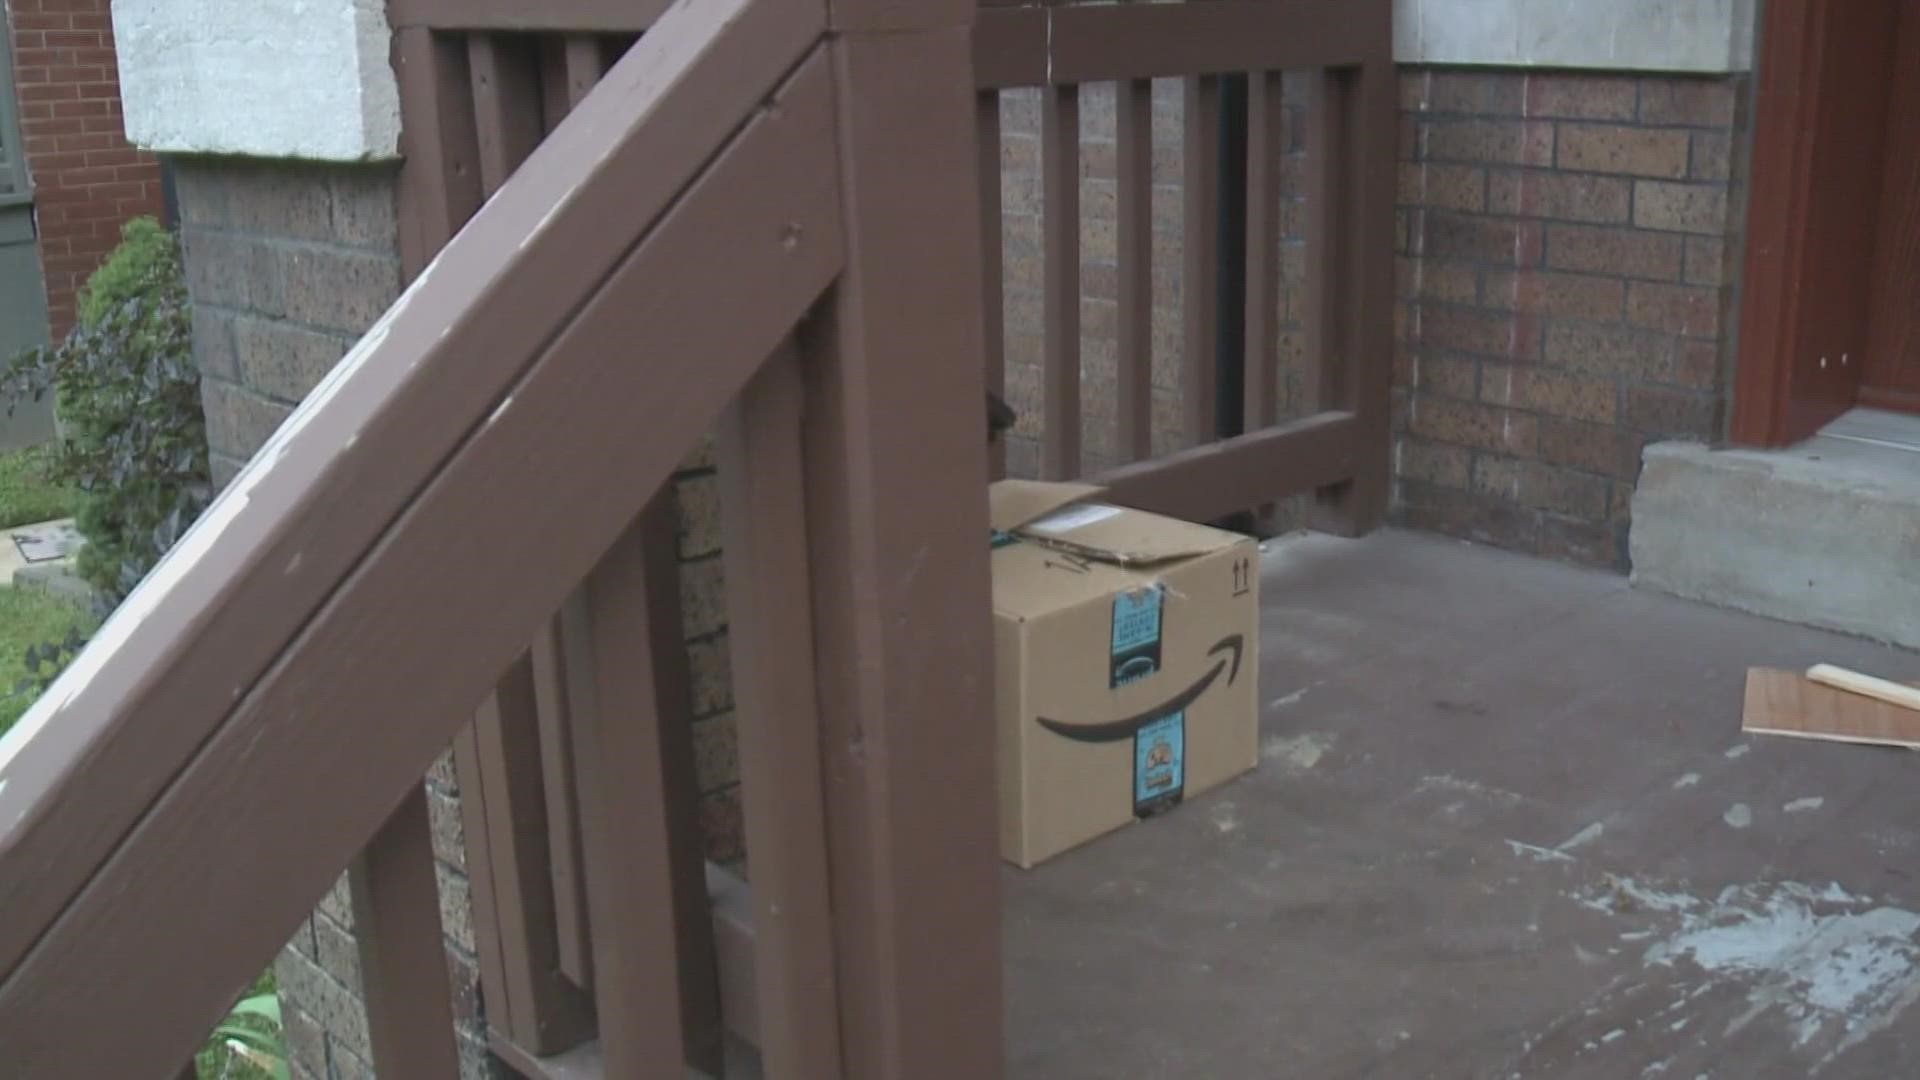 In short, don't get behind the wheel if you drink during the holidays, and watch for 'porch pirates' if you shop online.